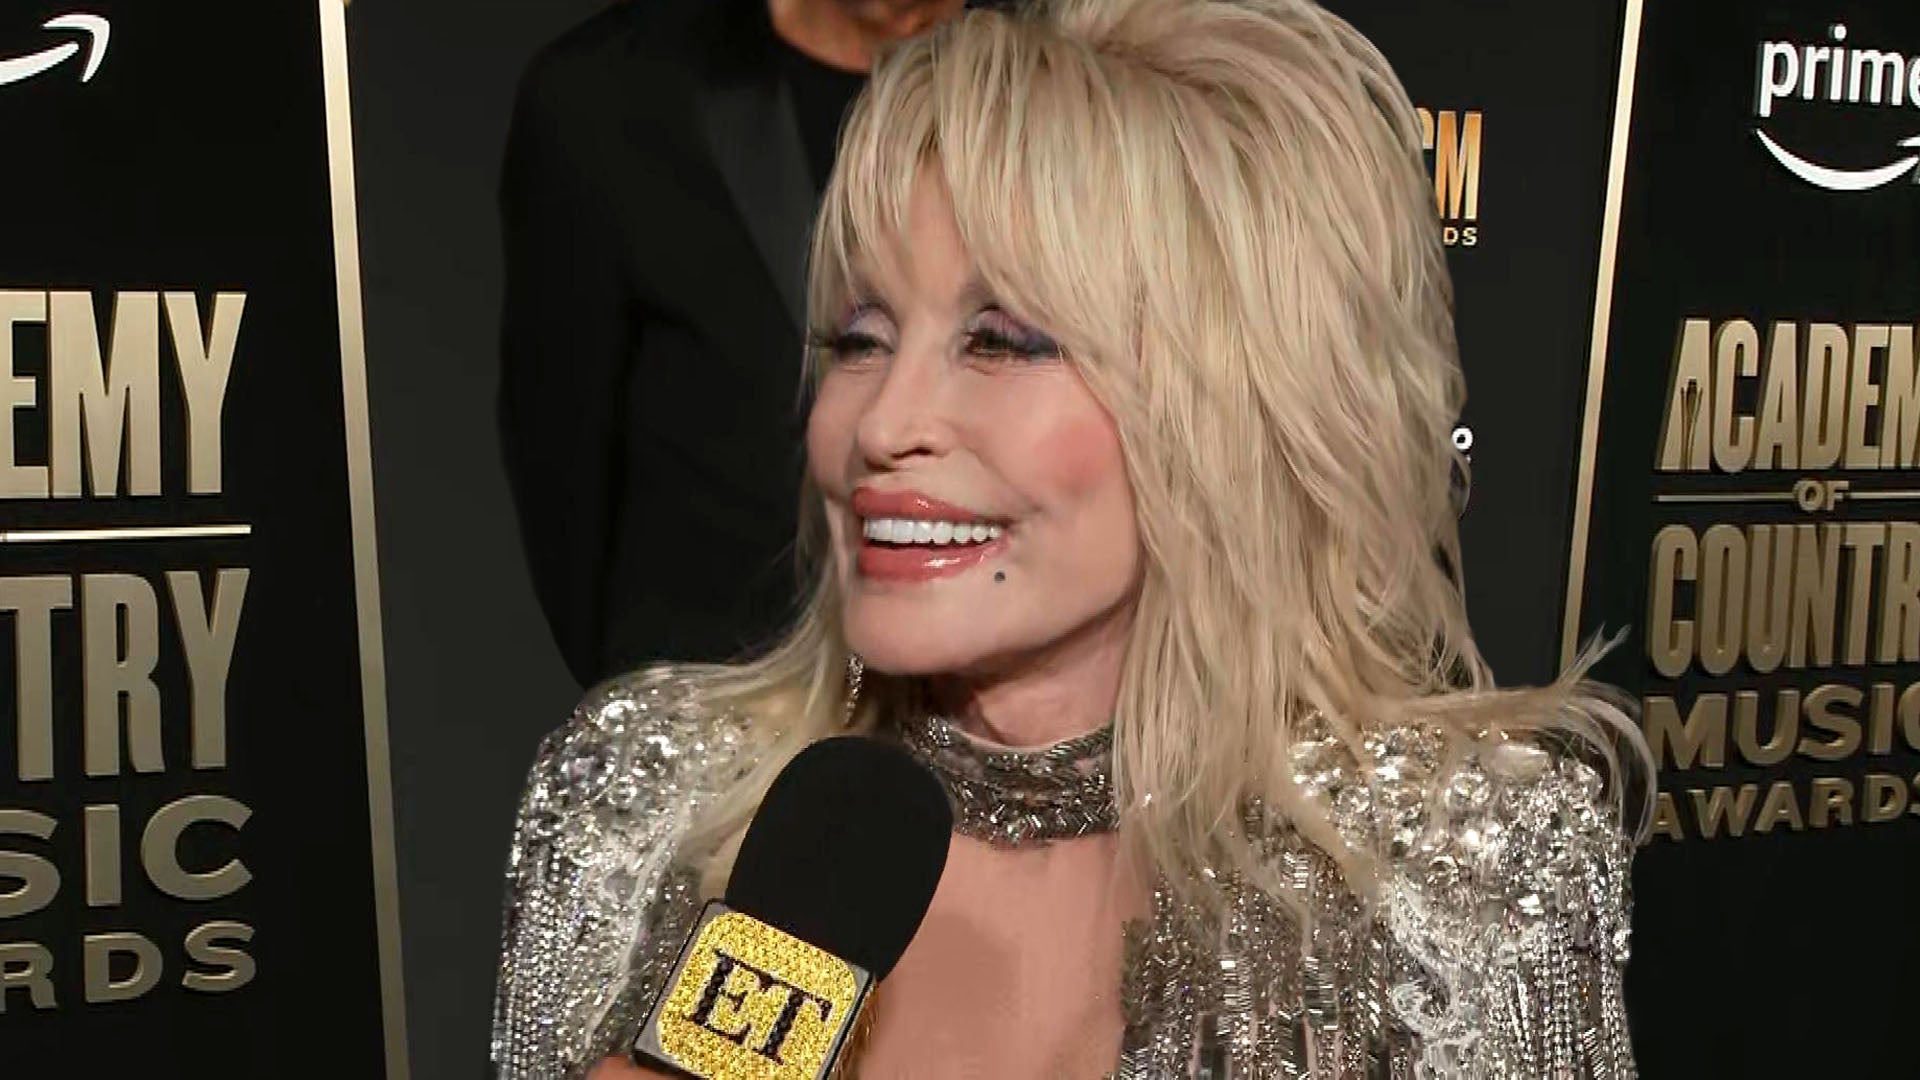 Dolly Parton says turning to rock was 'one of the most fun things